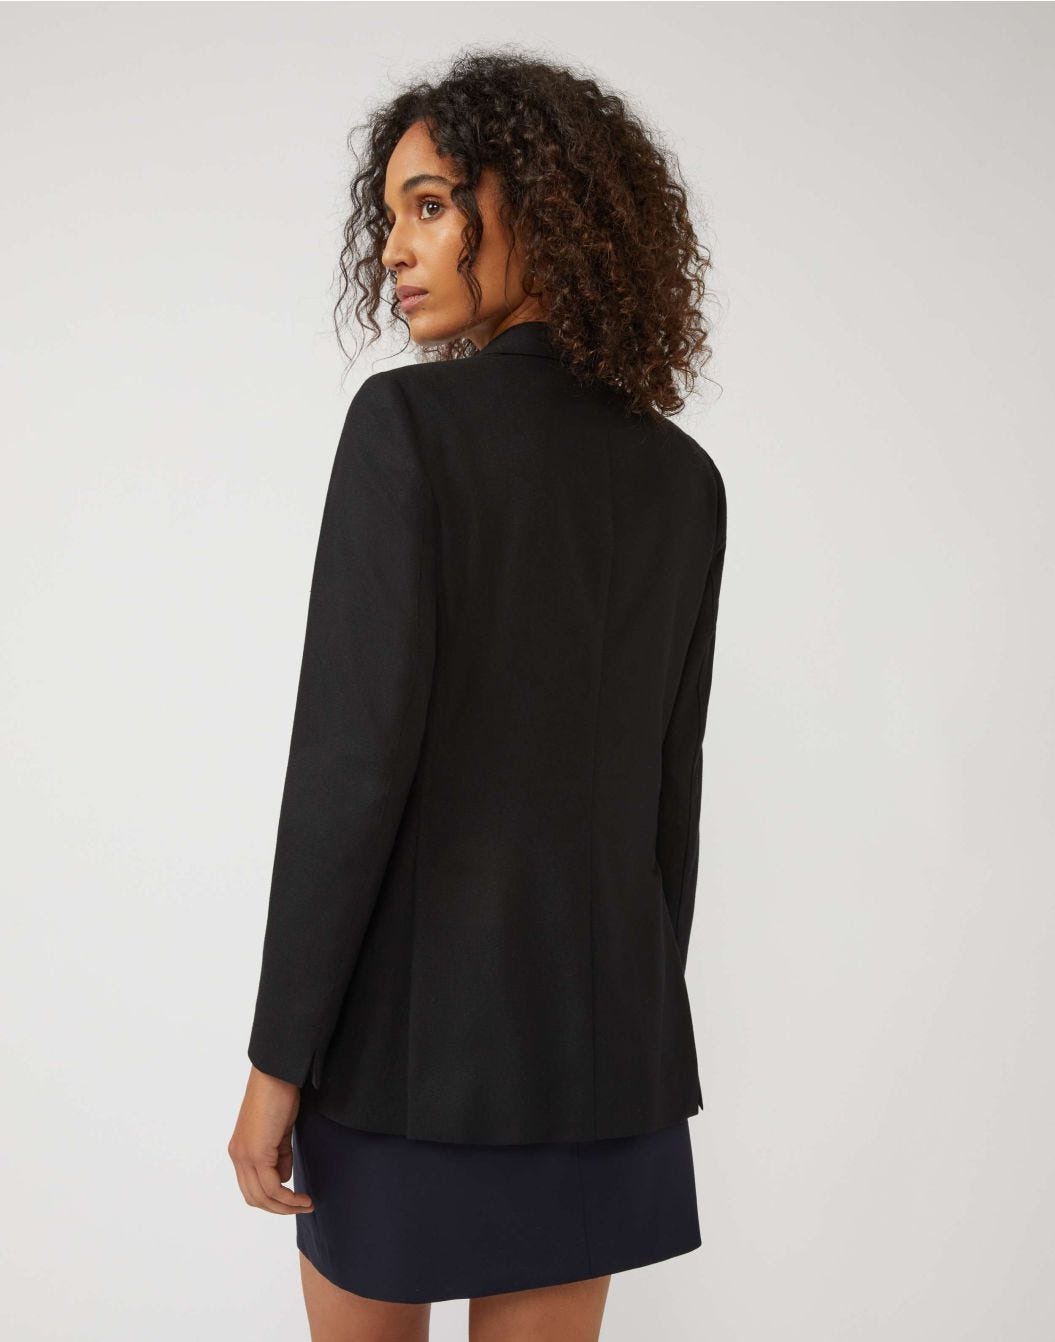 Black double-breasted jacket in cashmere